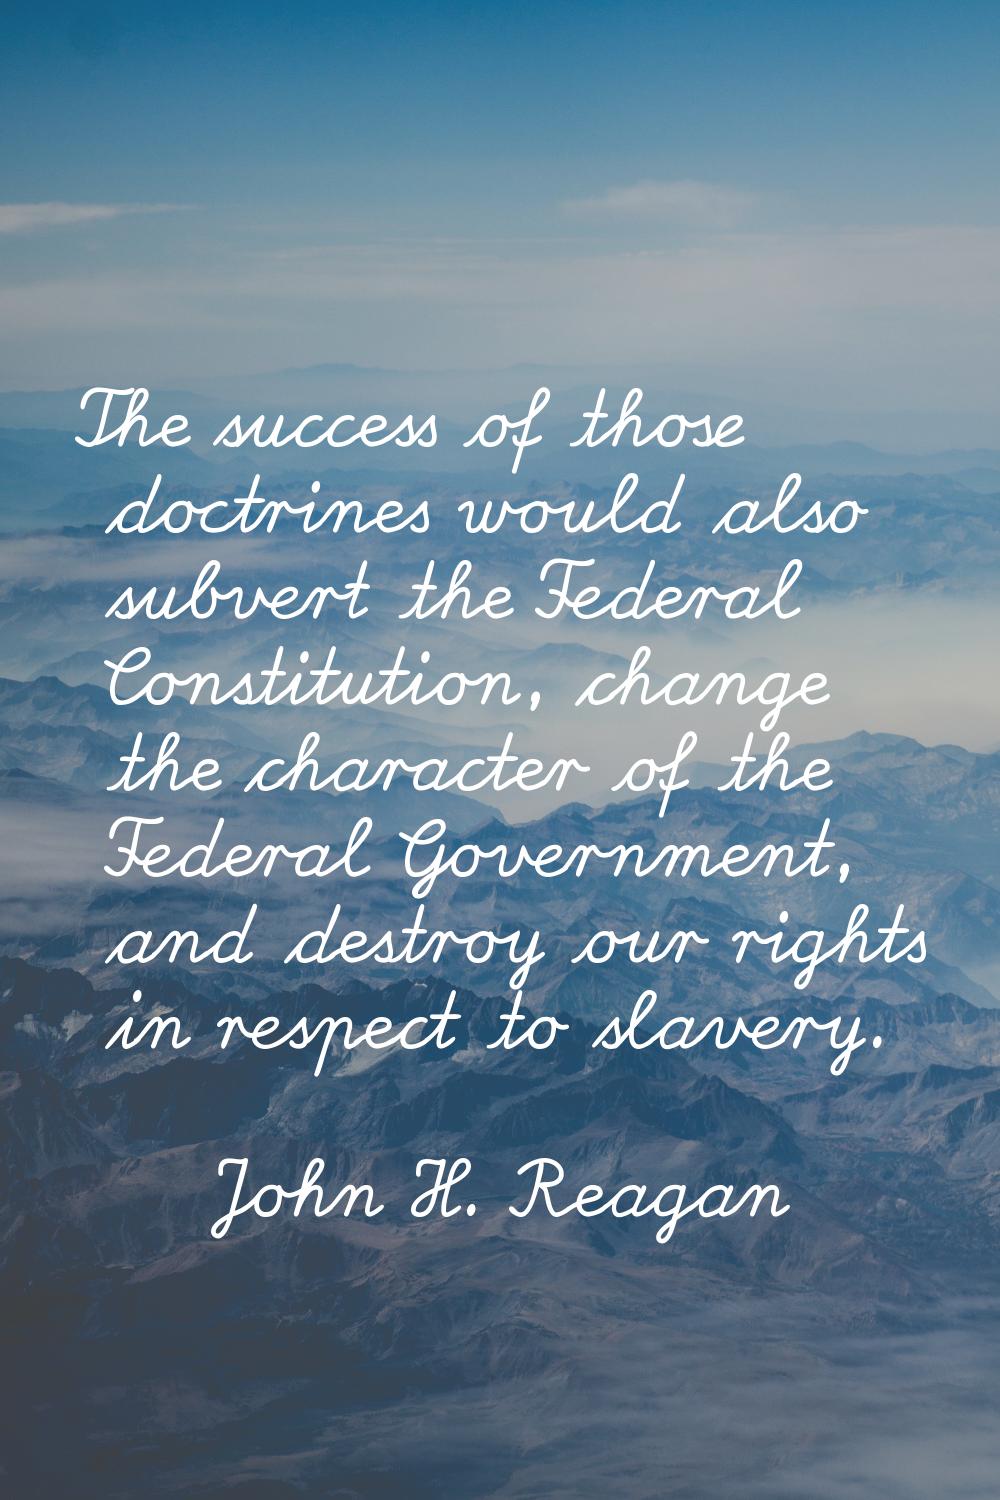 The success of those doctrines would also subvert the Federal Constitution, change the character of